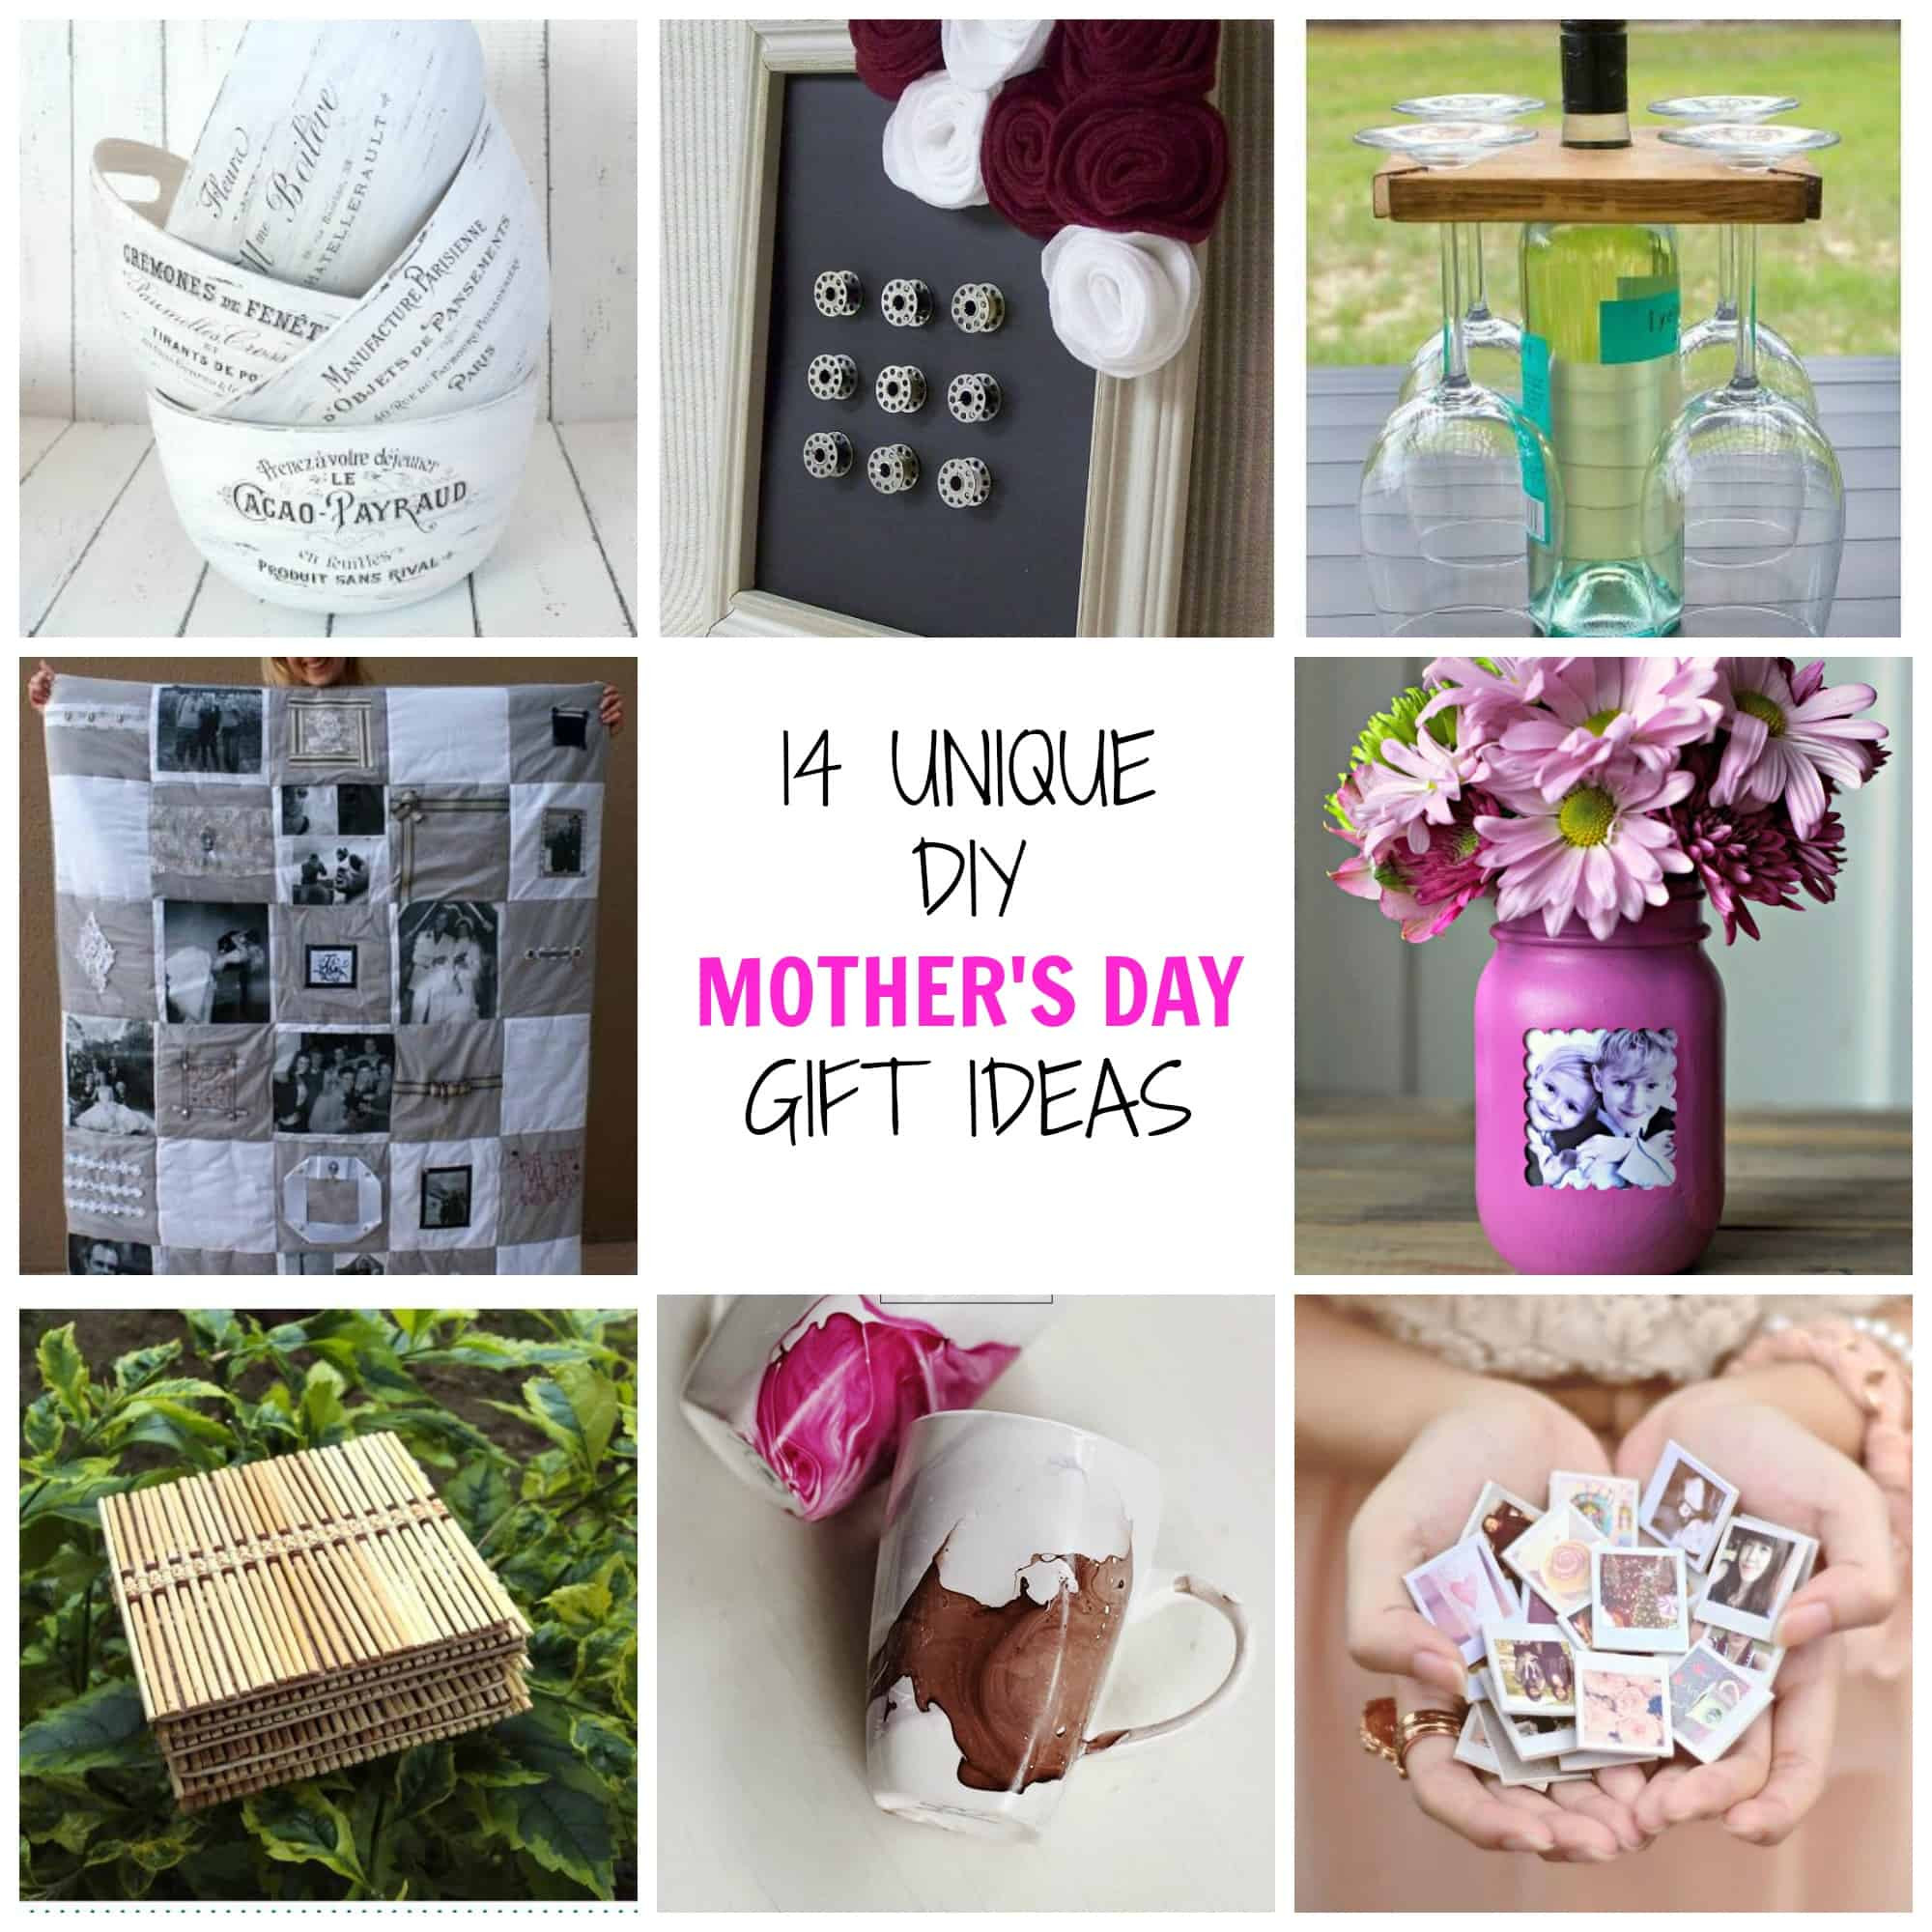 Mother'S Day Unique Gift Ideas
 14 Unique DIY Mother s Day Gifts Simplify Create Inspire